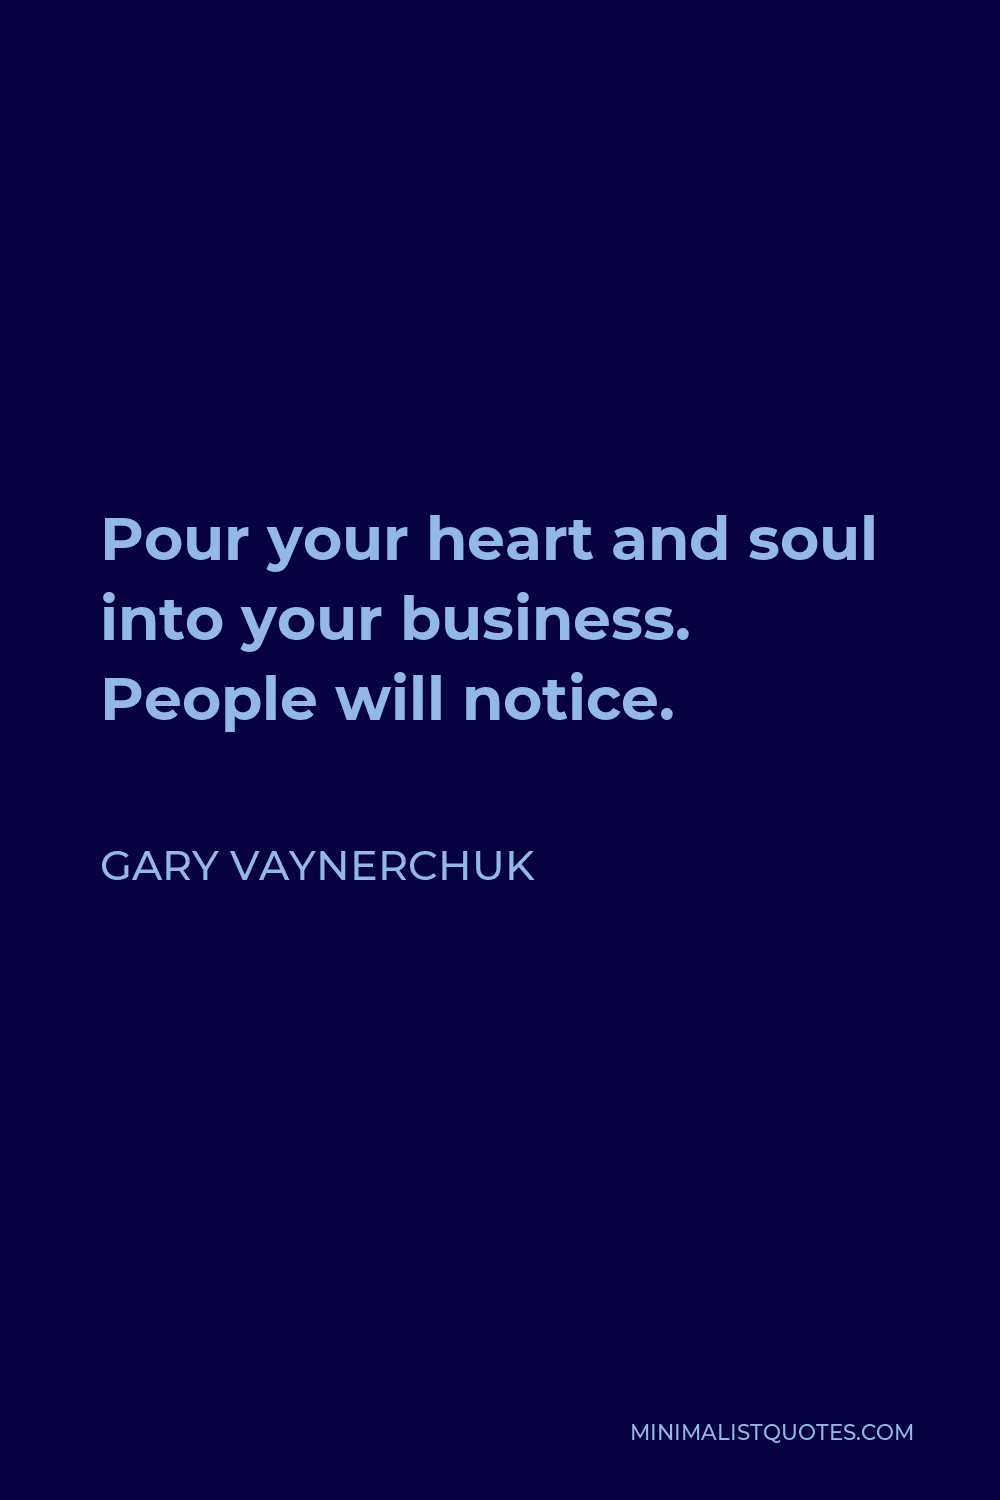 Gary Vaynerchuk Quote - Pour your heart and soul into your business. People will notice.